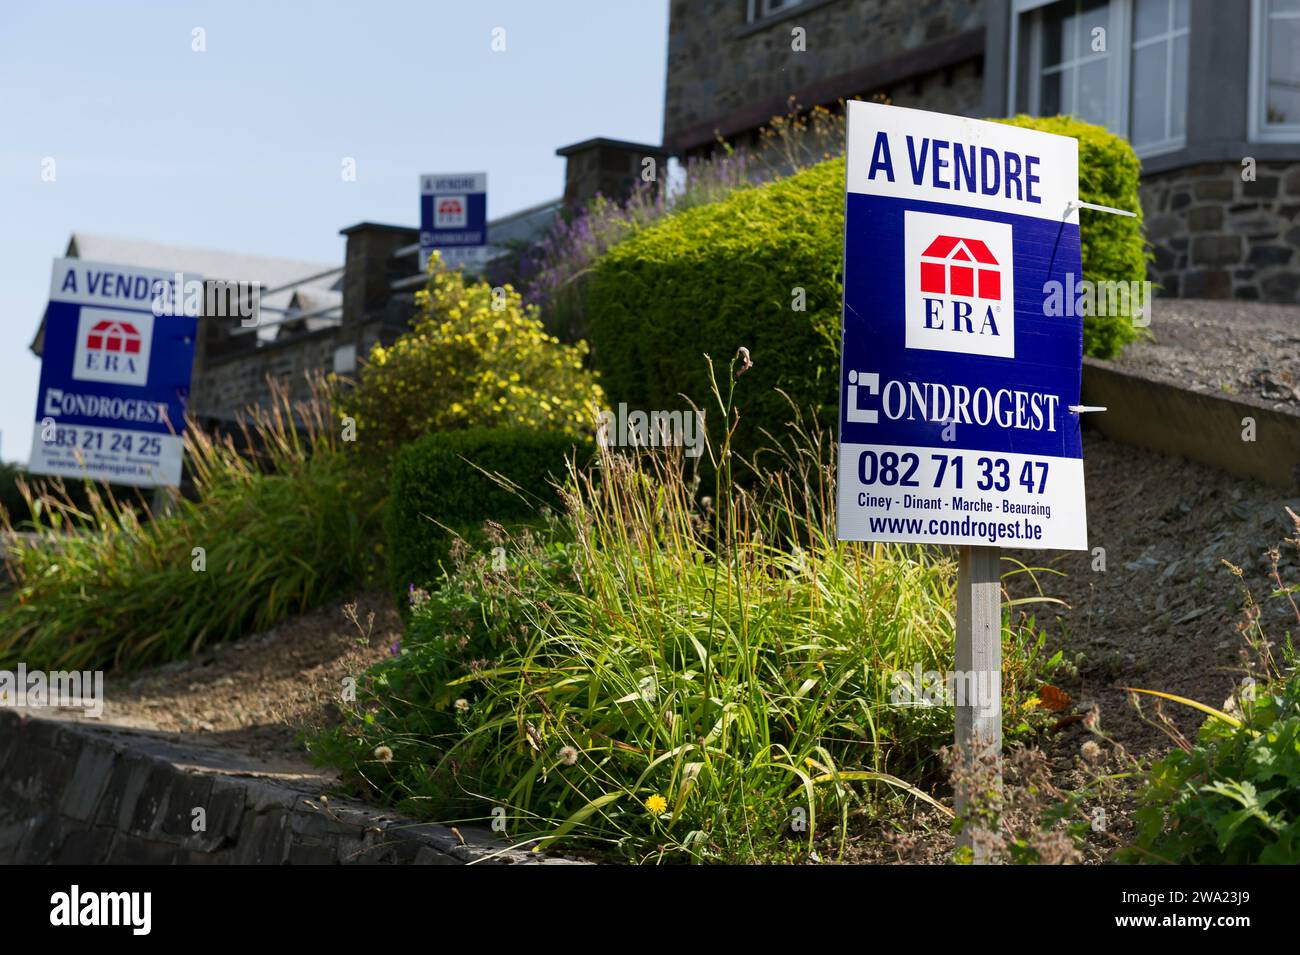 Maisons a vendre ou a louer | House for rent or to sale Stock Photo